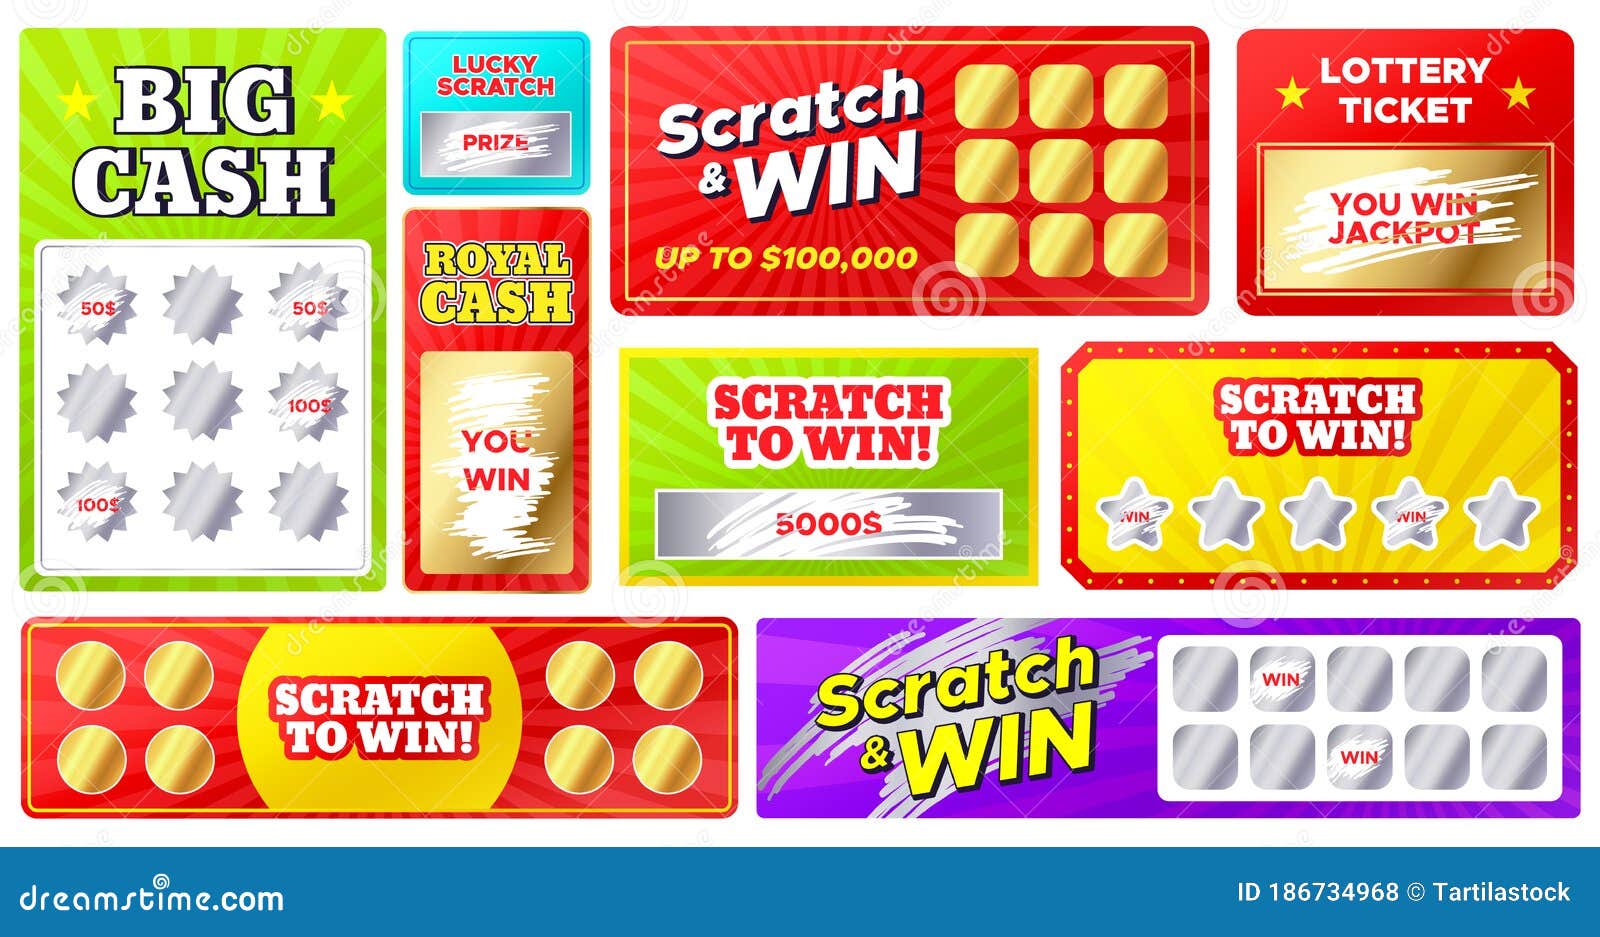 Oregon pulls plug on video lottery game that nearly broke the bank | News | 